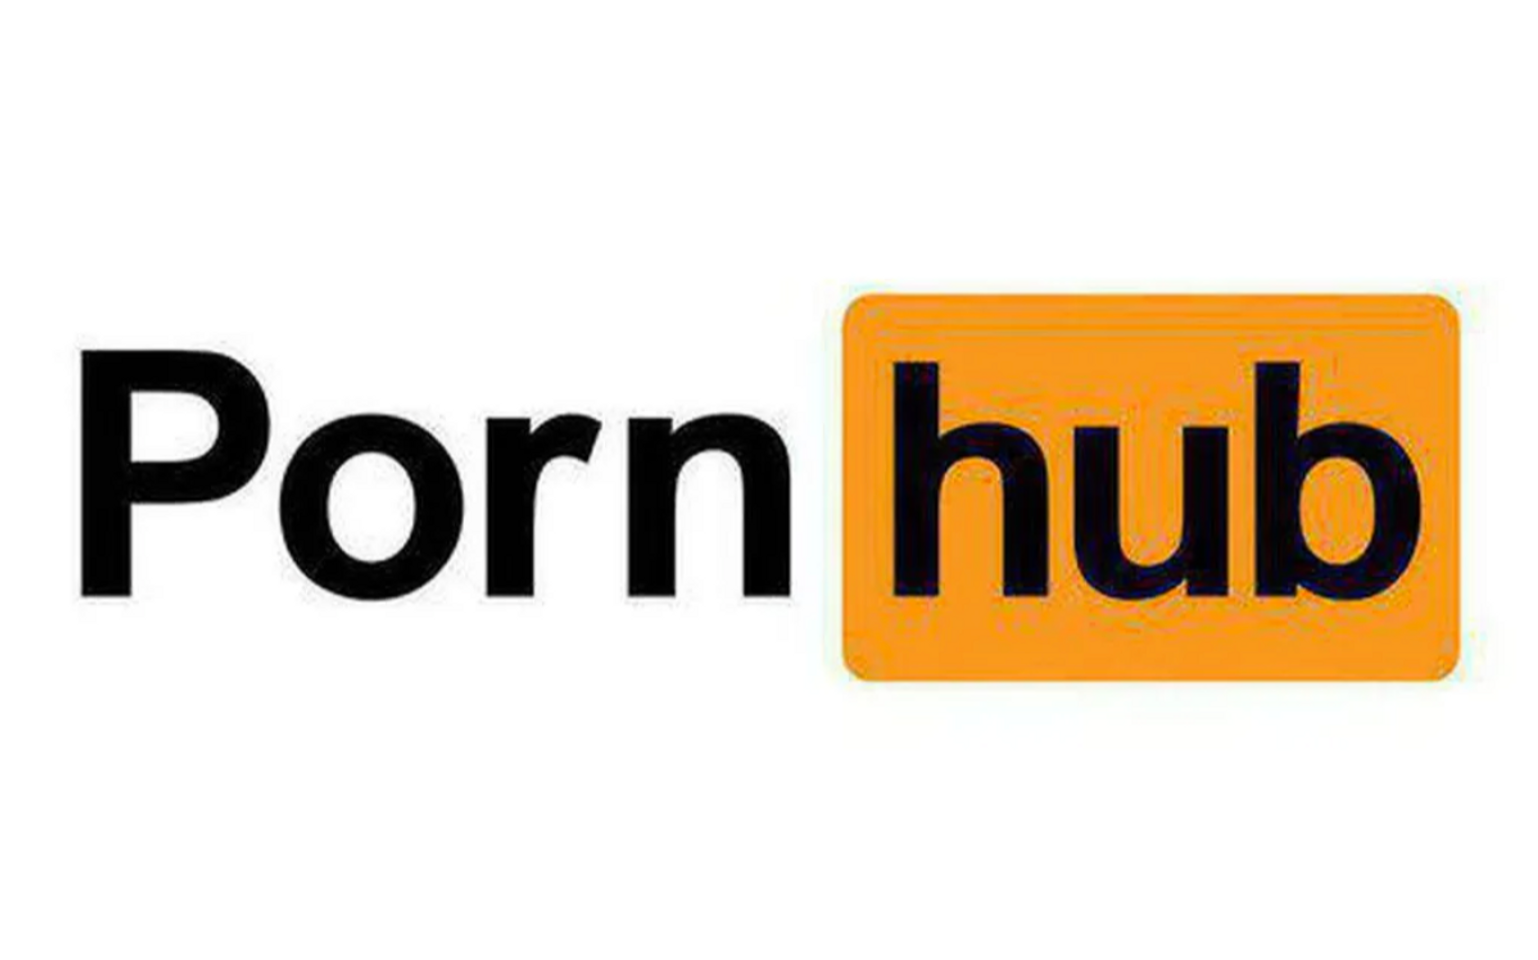 Pornhub Announces New Safety & Security Policies